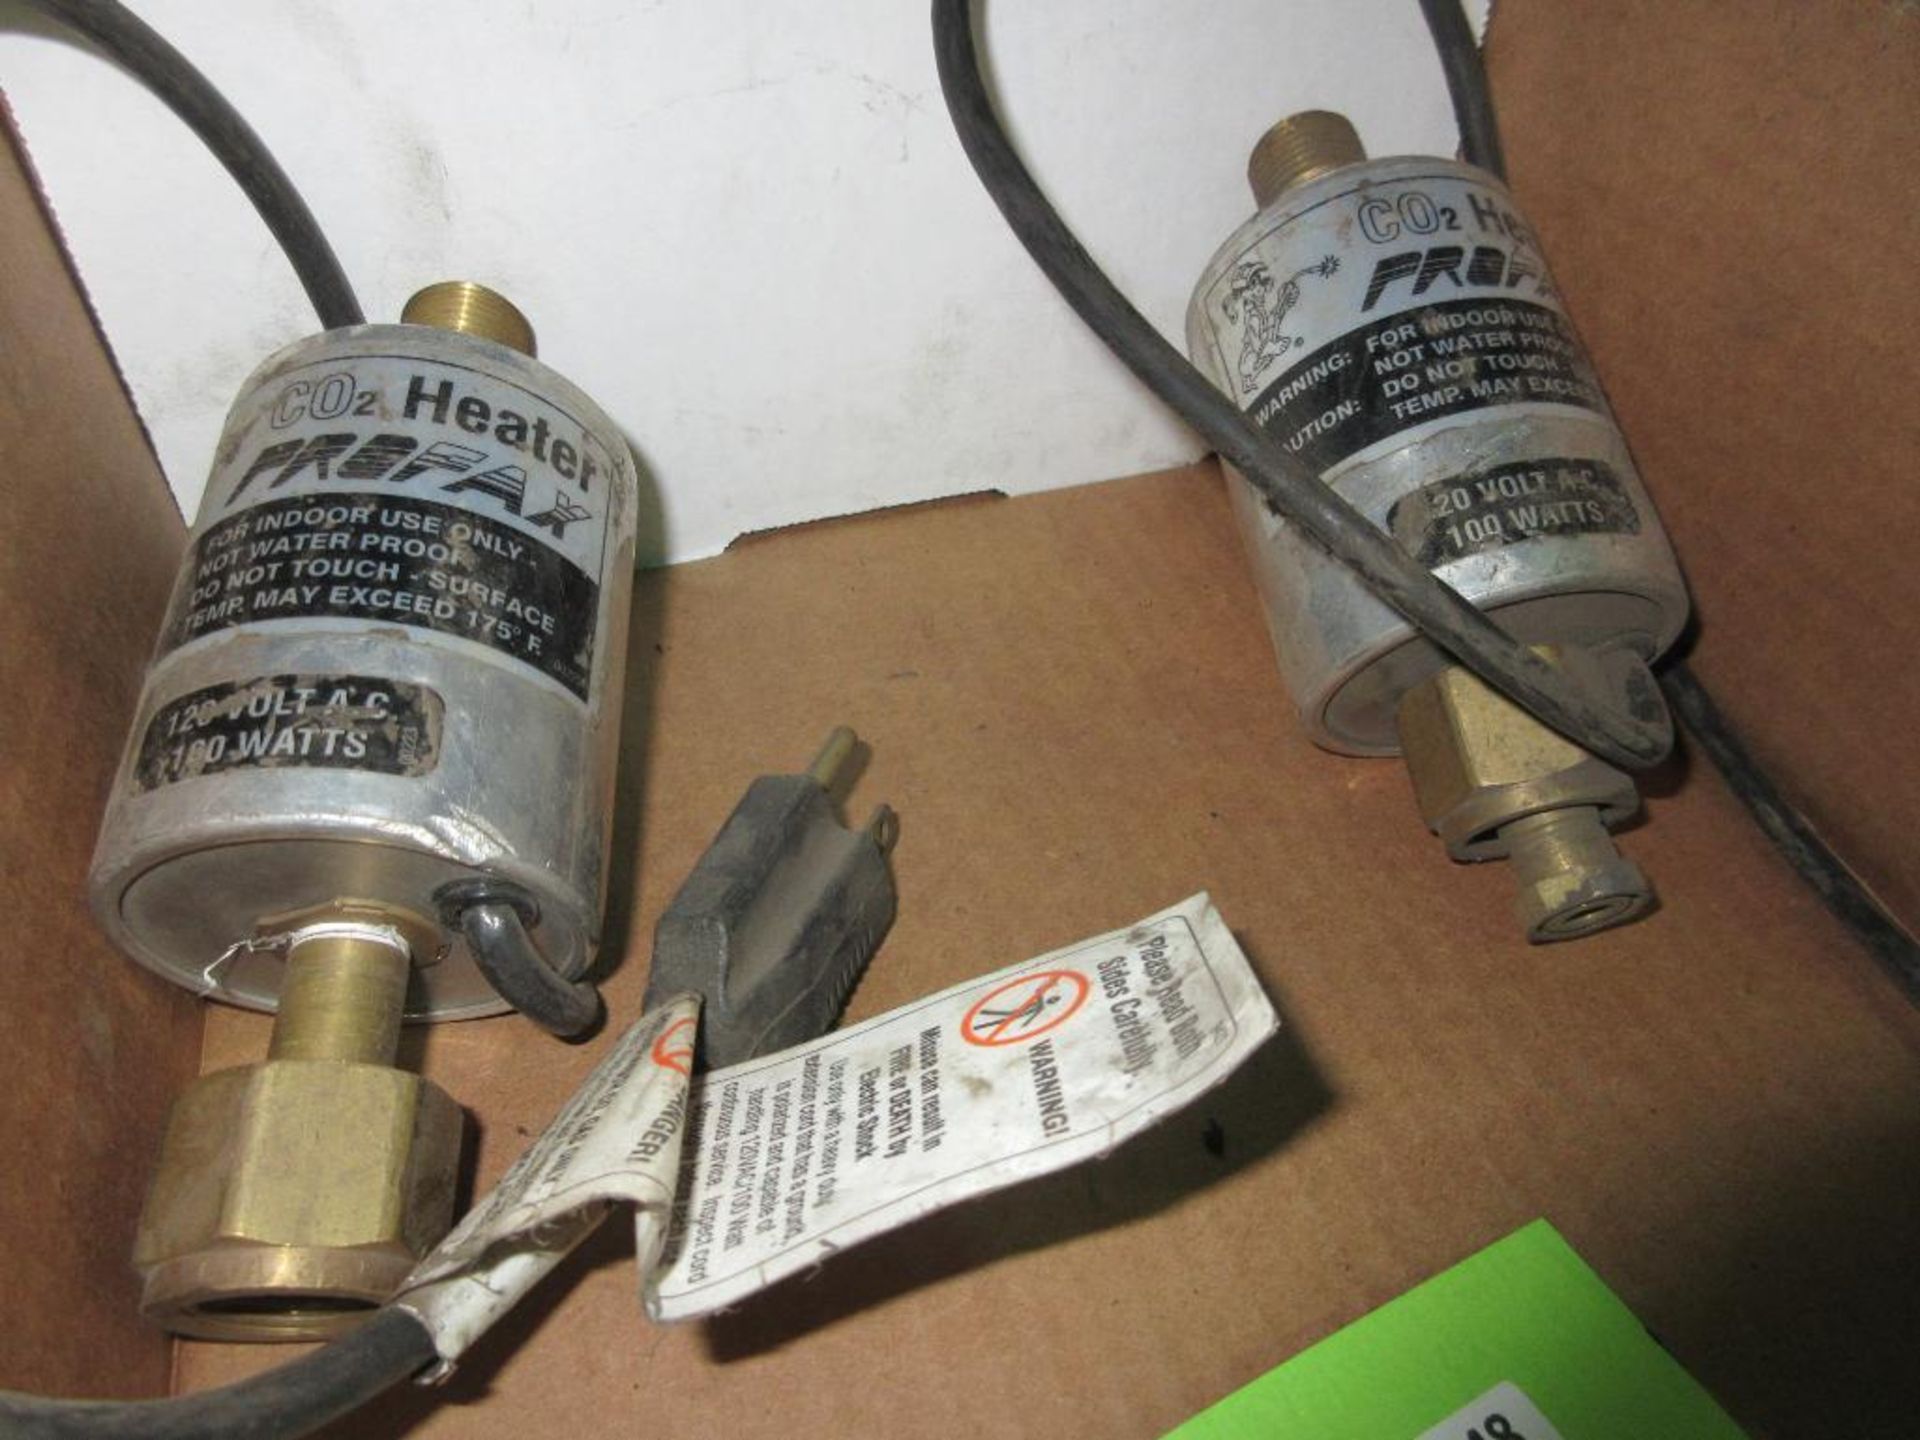 LOT OF 2 PROFAX CO2 ELECTRIC HEATERS AND REGULATORS ON 2 SHELVES (EAST WELDING SHOP)